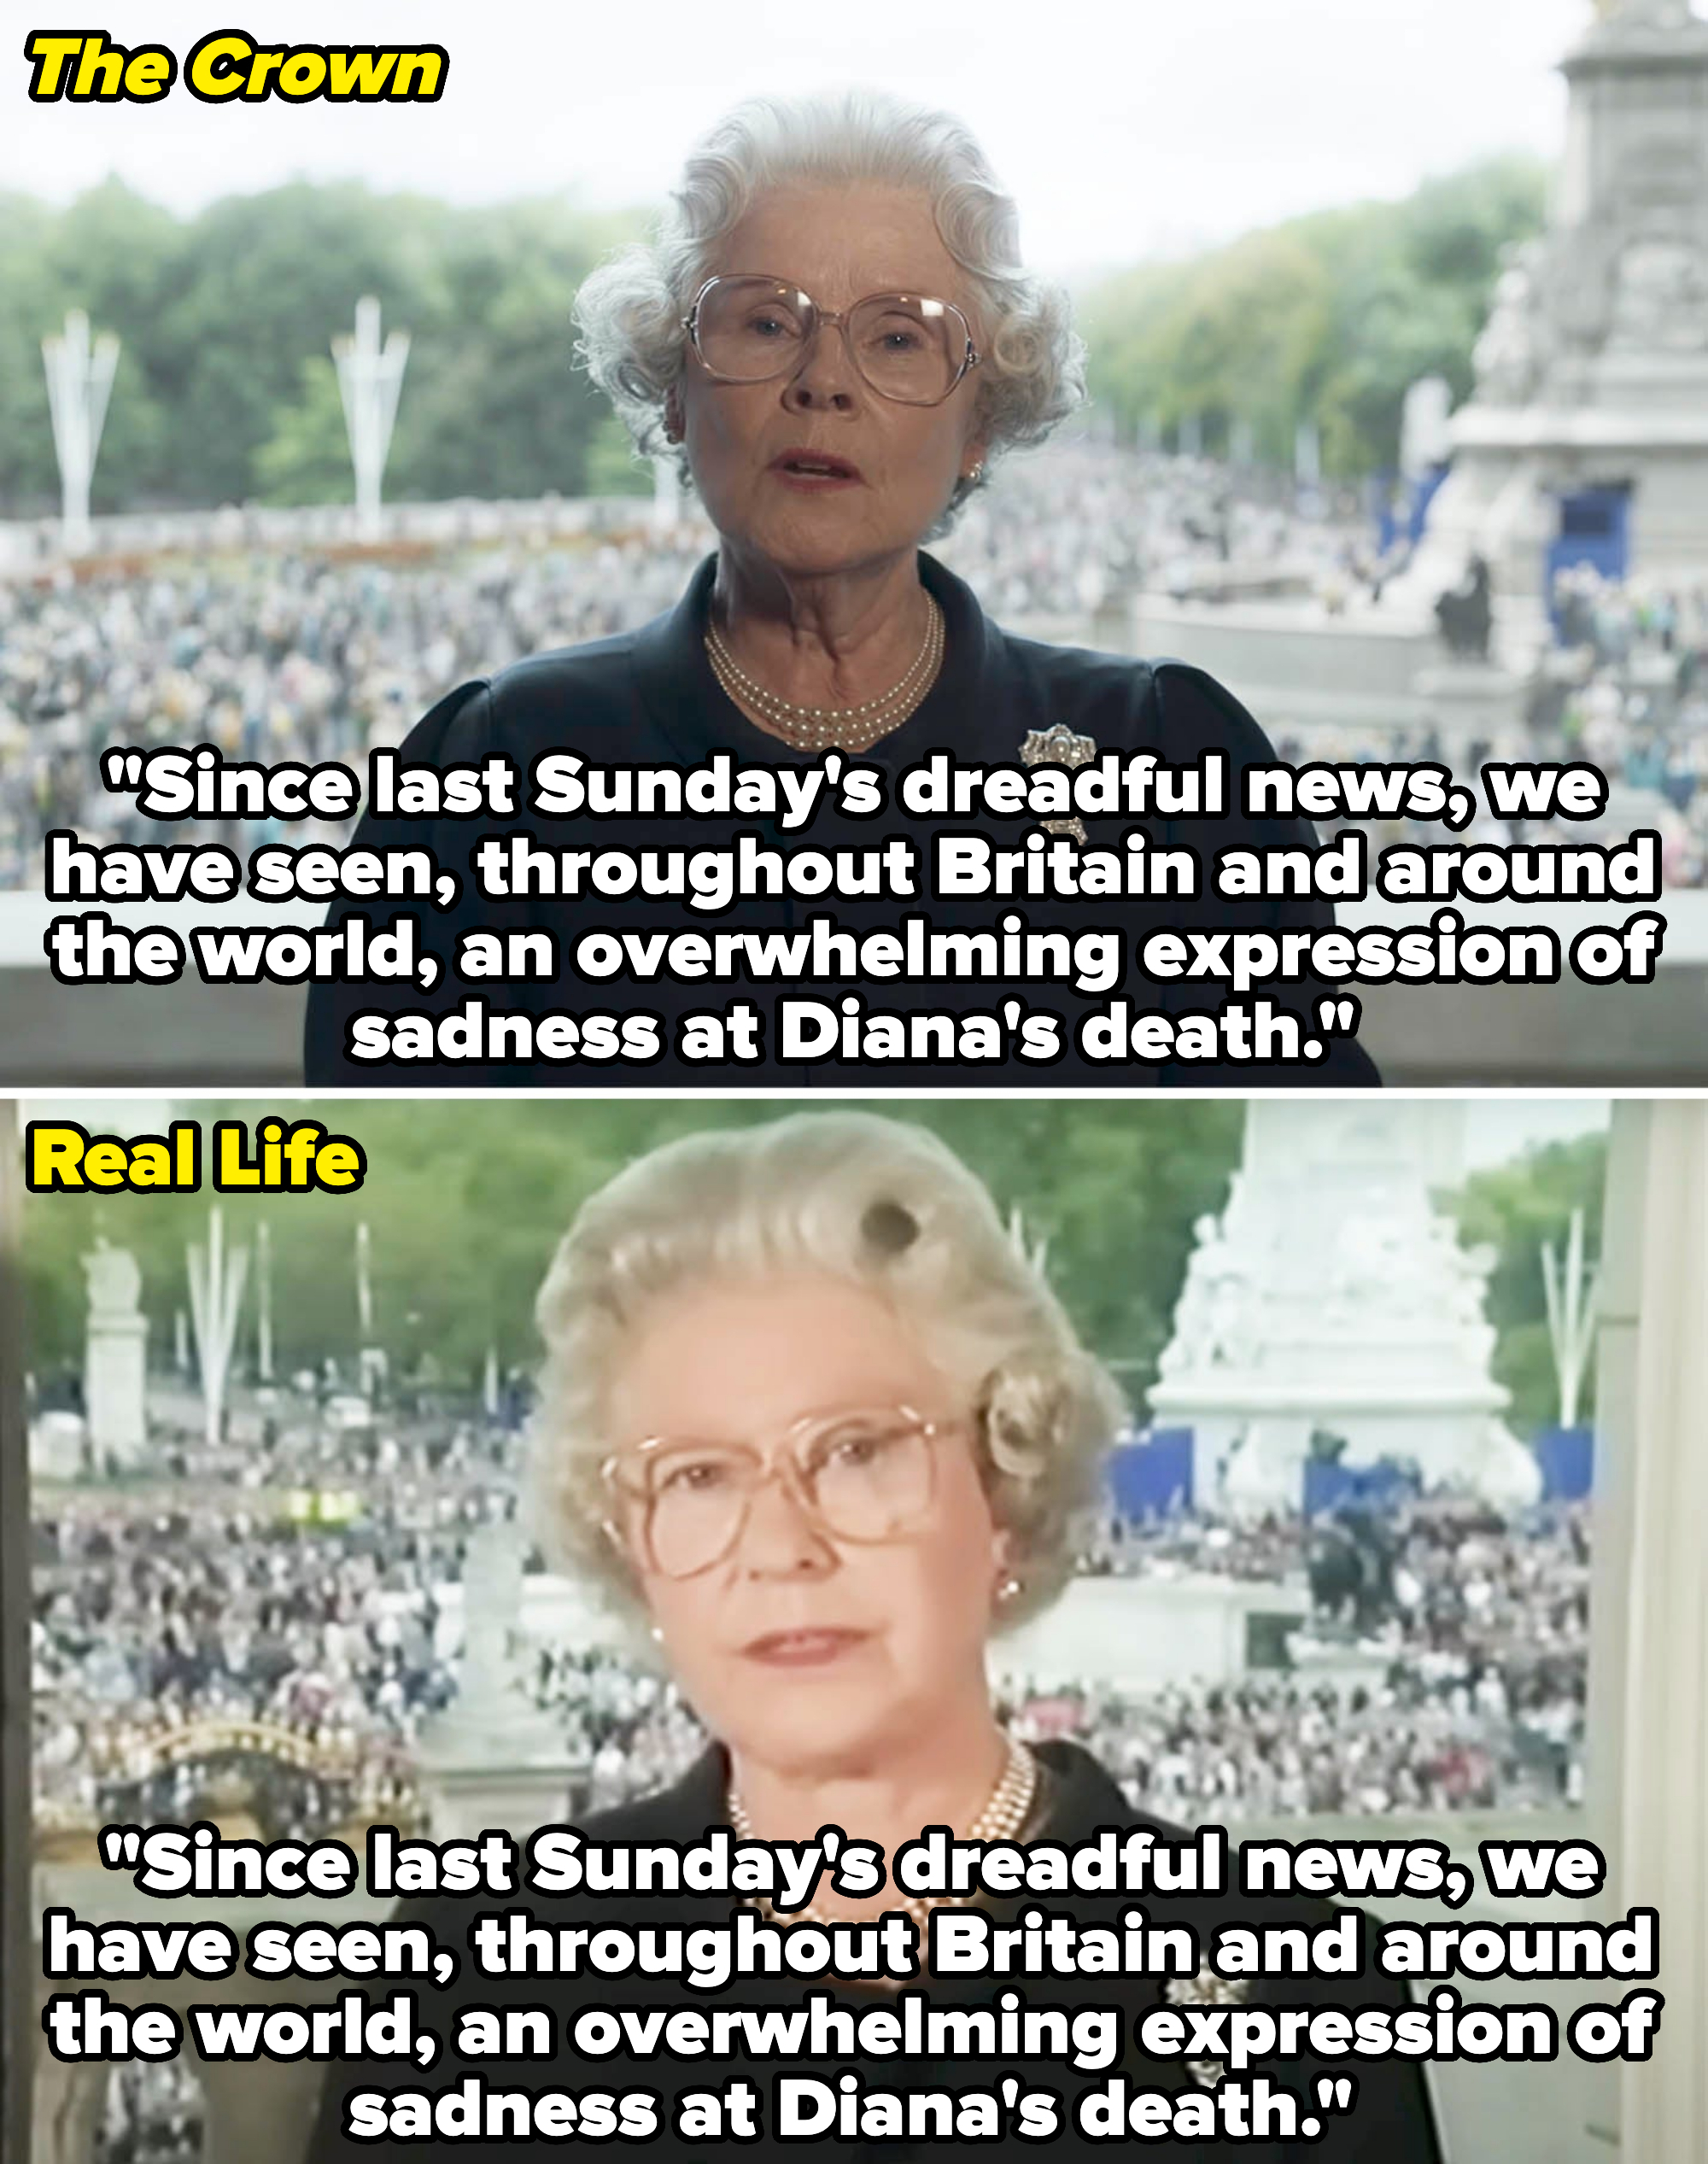 Side-by-sides of Queen Elizabeth expressing condolences for Diana